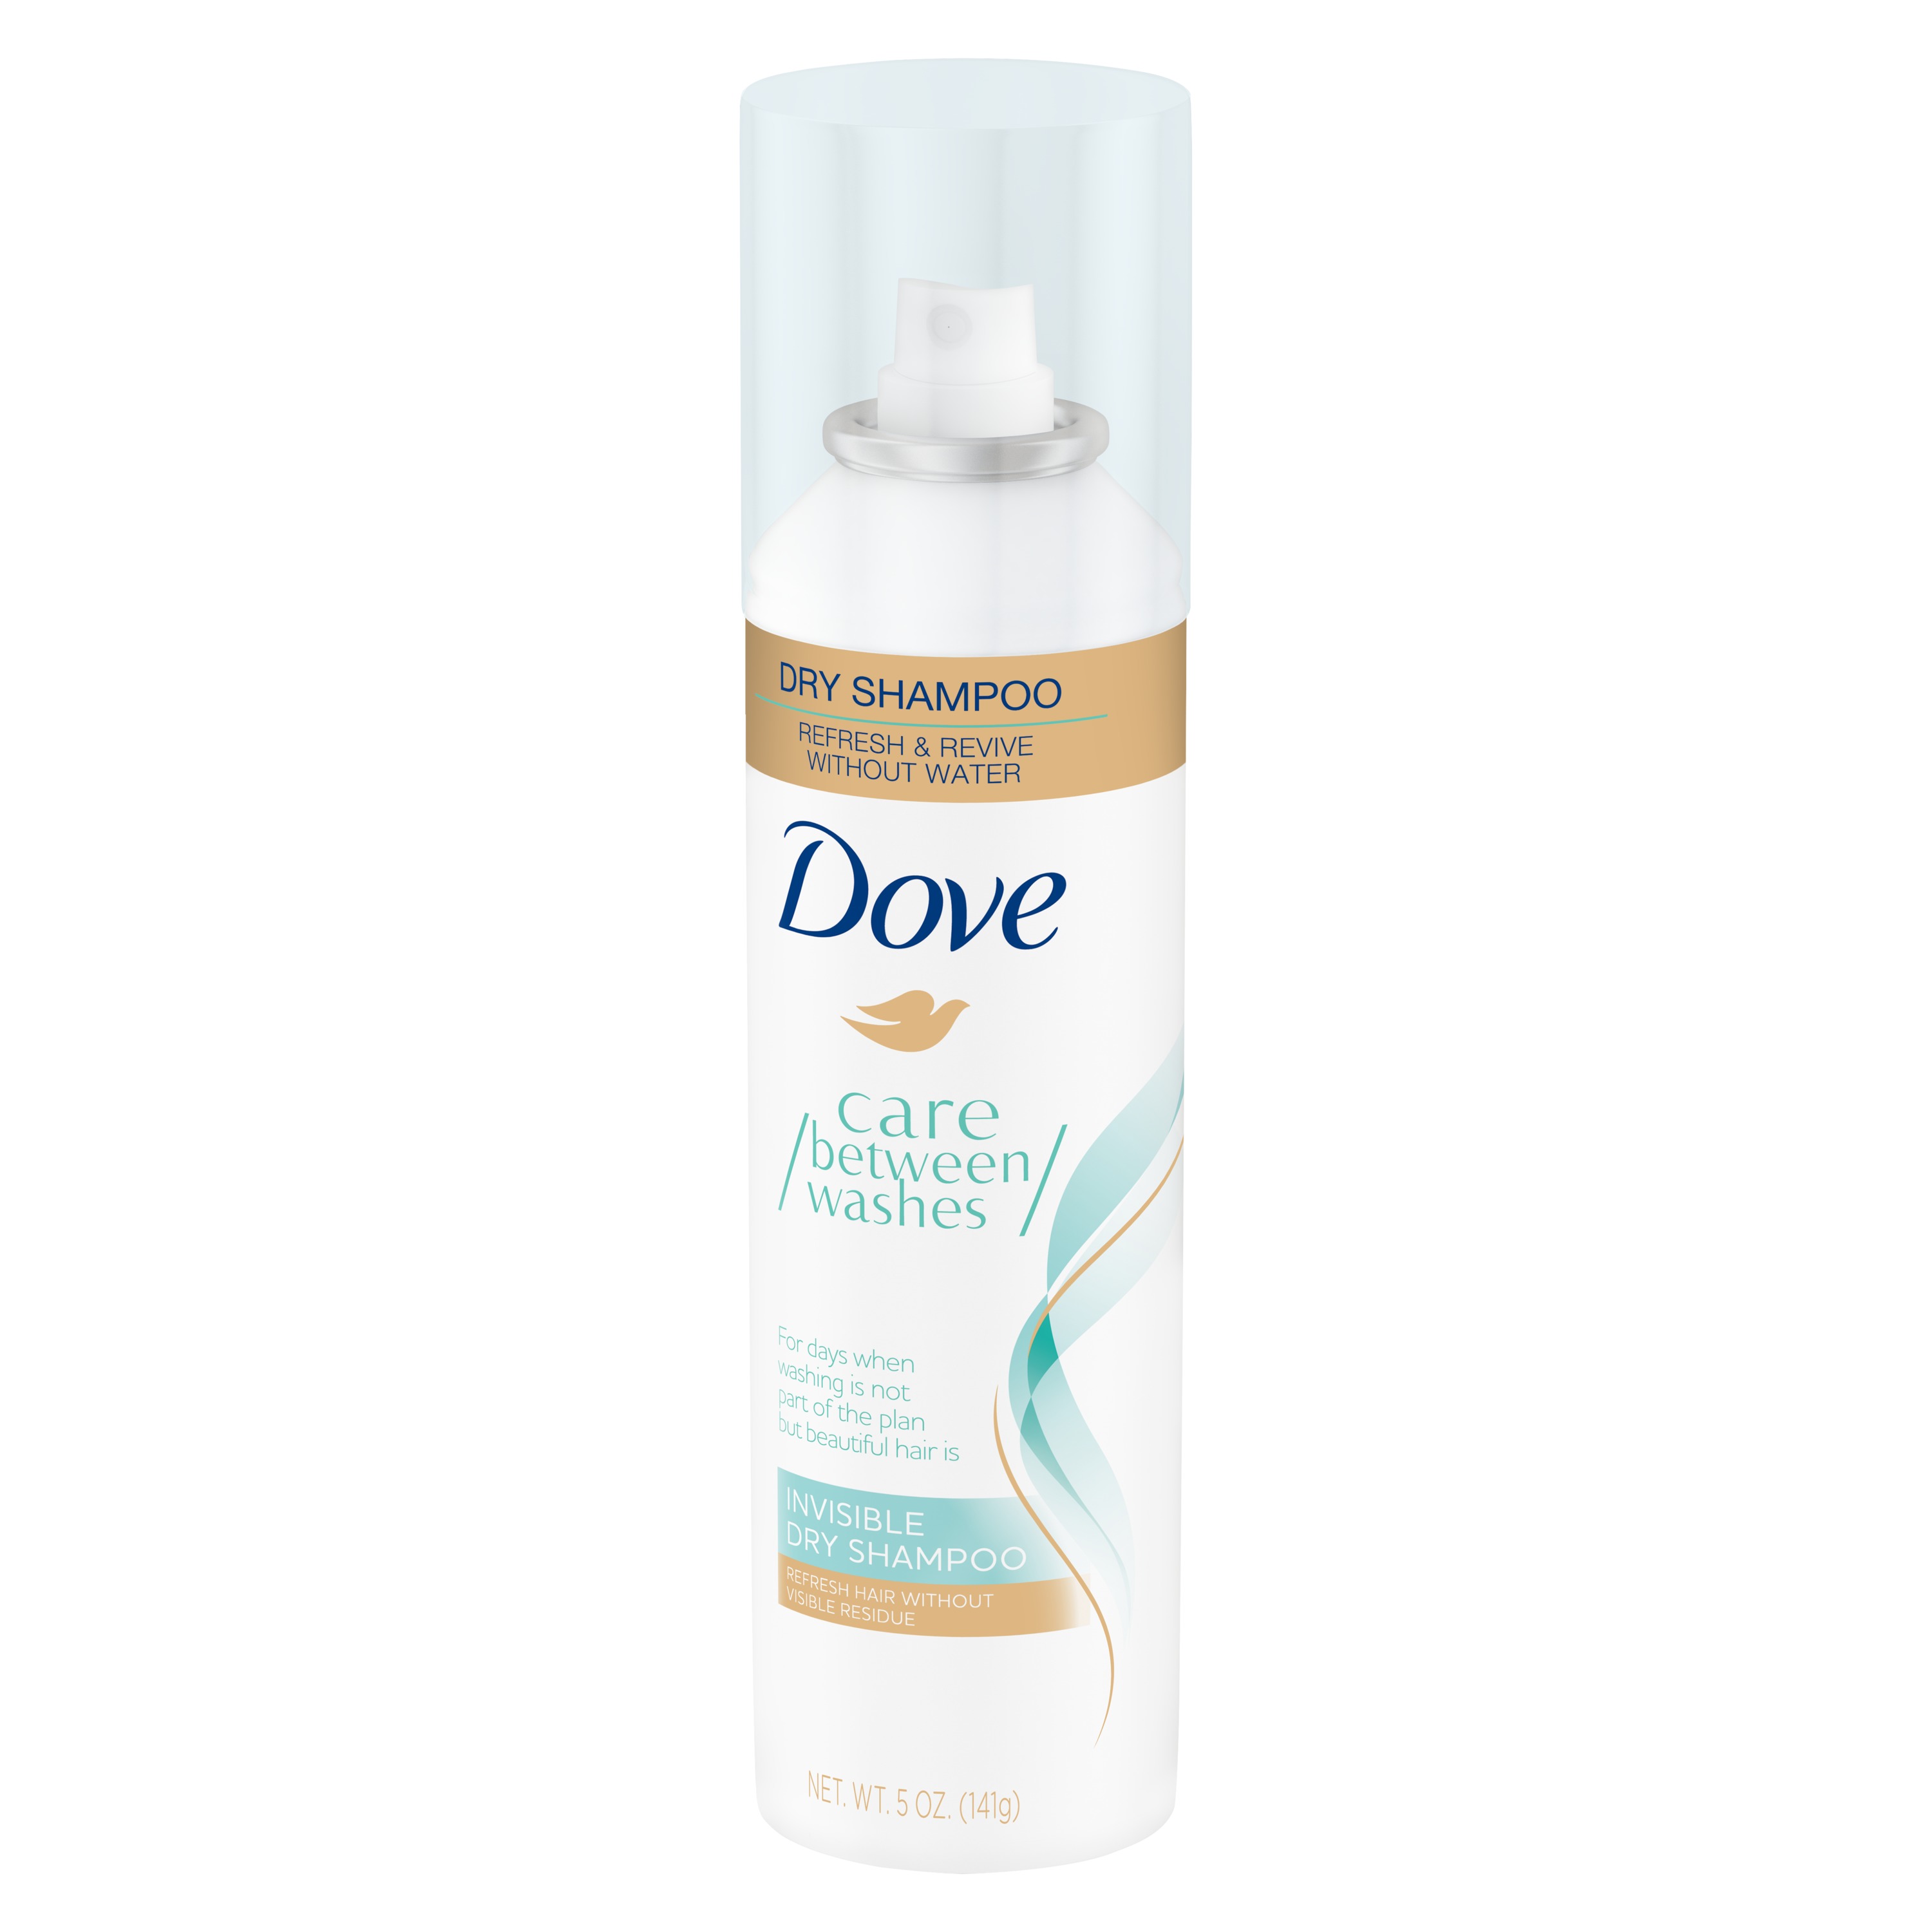 Dove Care Between Washes Dry Shampoo Invisible, 5 oz - image 7 of 10